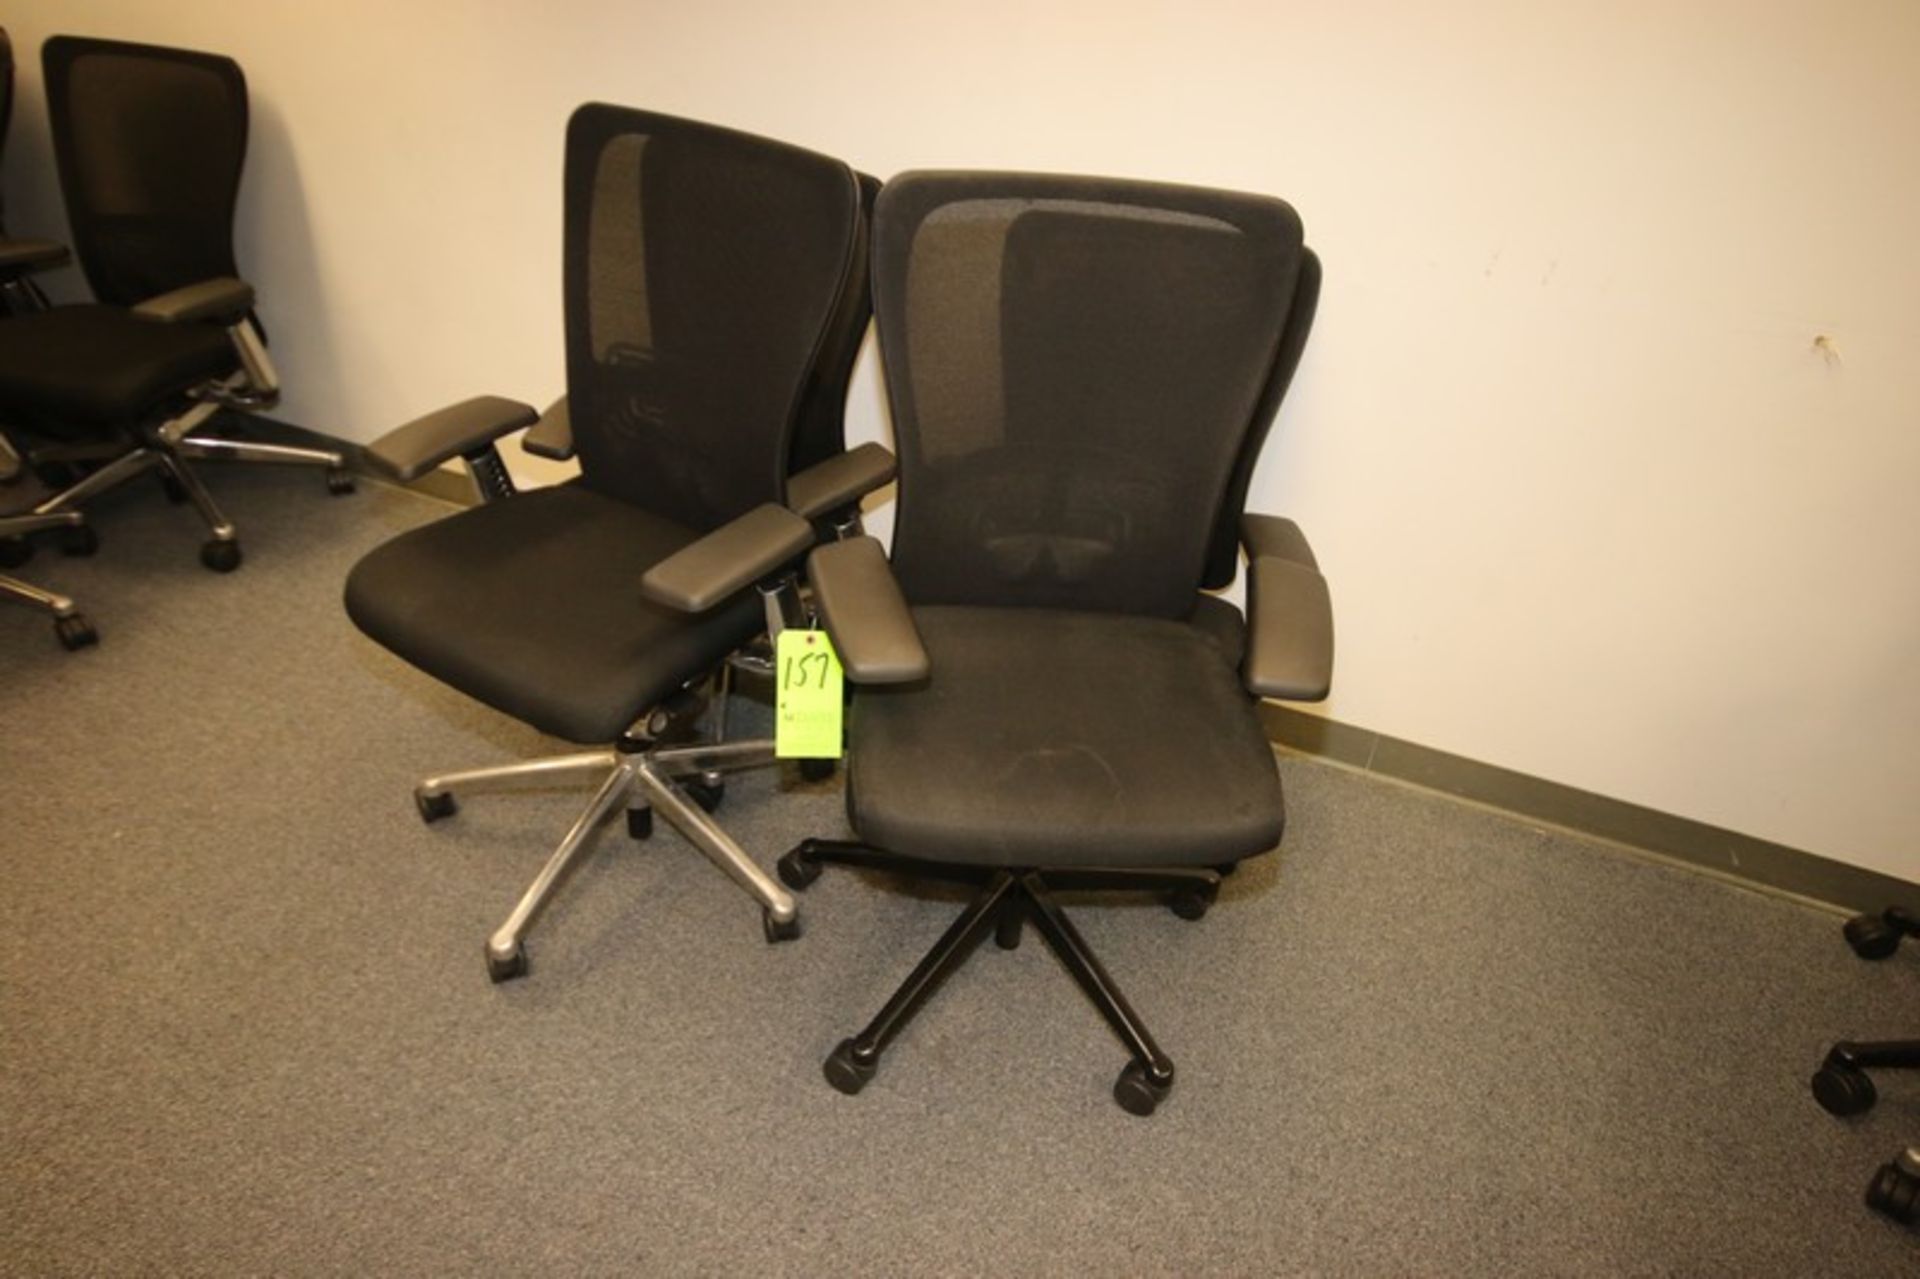 Haworth Zody Task Chairs w/ arms - A high-performing task chair, Zody blends science-based - Image 2 of 3